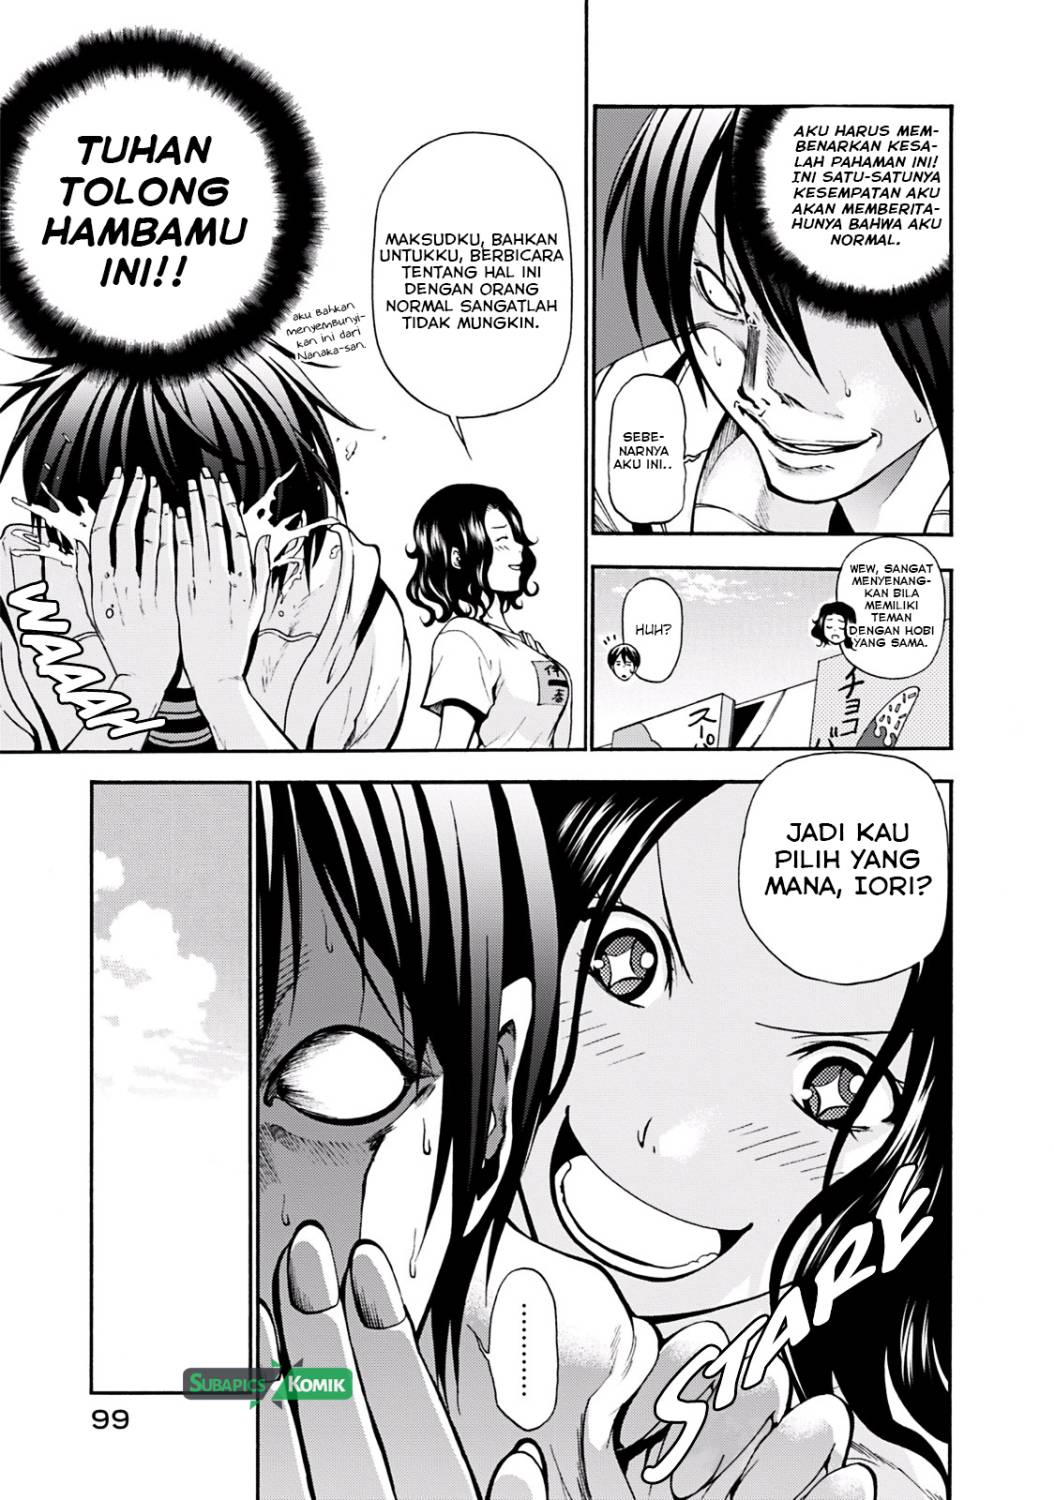 Grand Blue Chapter 7